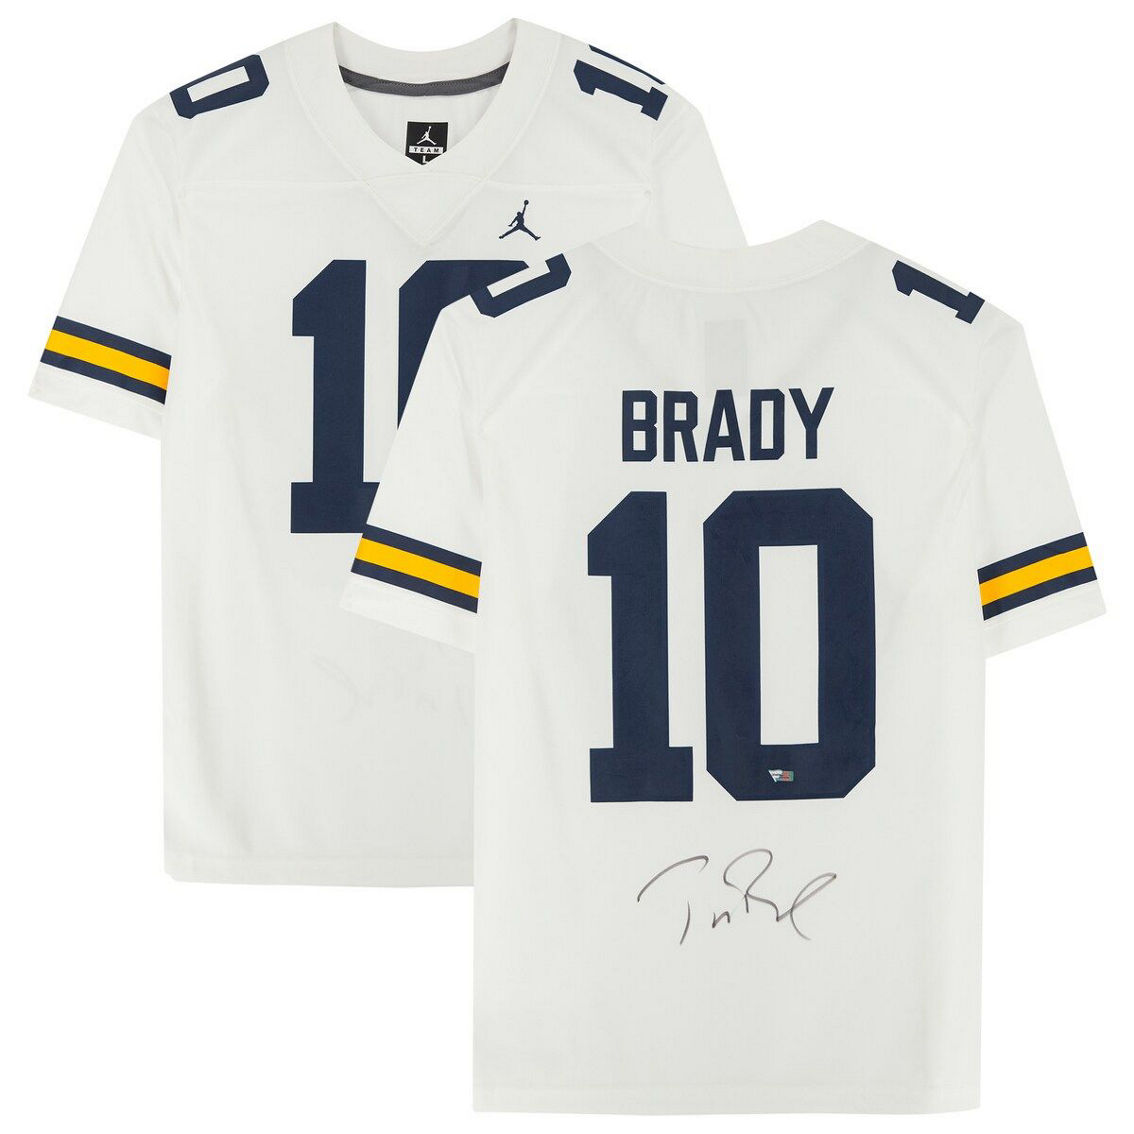 Fanatics Authentic Tom Brady White Michigan Wolverines Autographed Game Jersey - Image 2 of 4